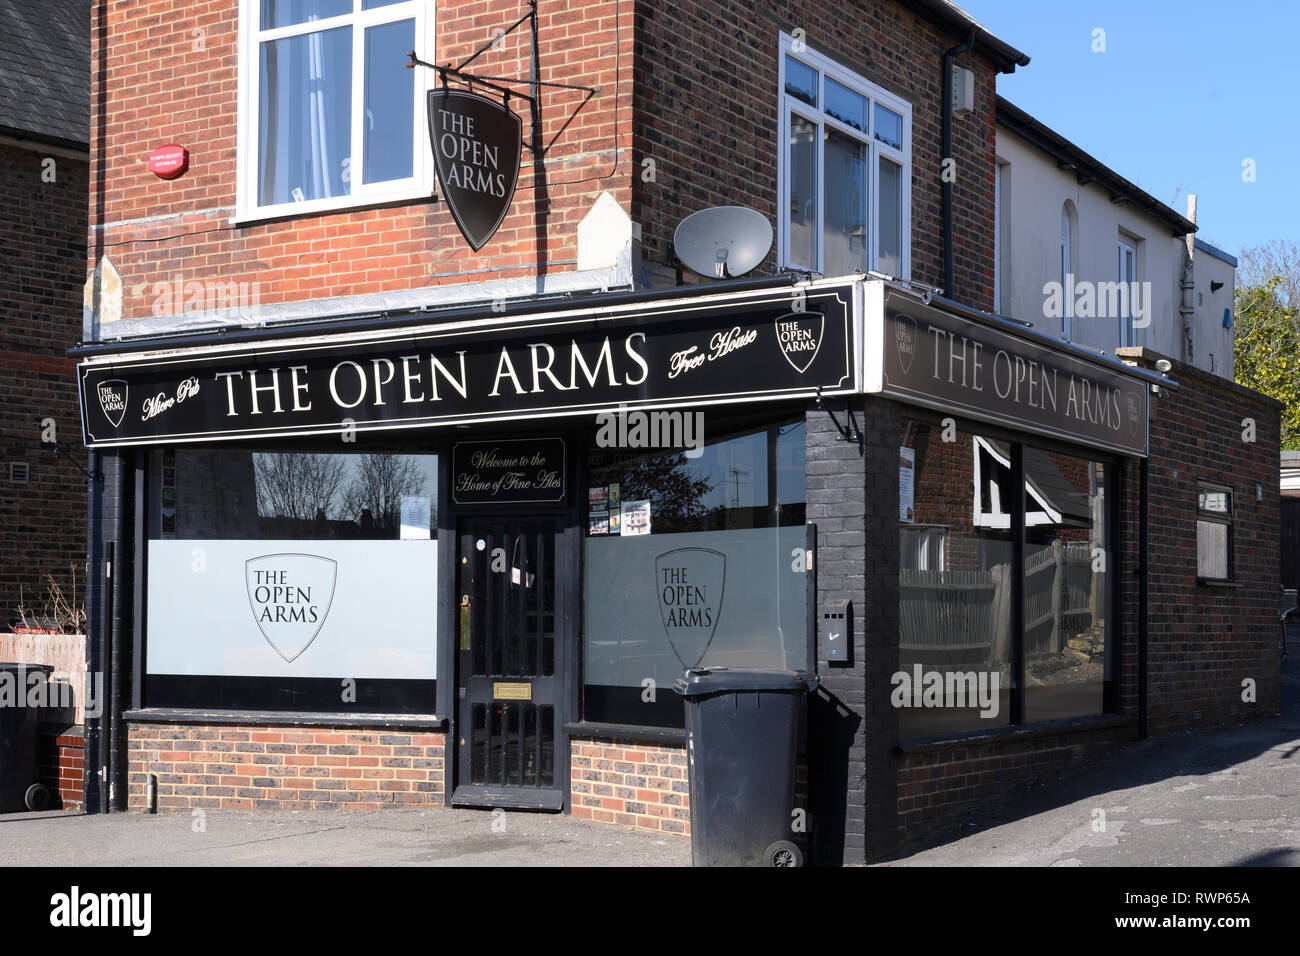 The Open Arms public house, Railway Approach, East Grinstead, West Sussex, England, UK Stock Photo